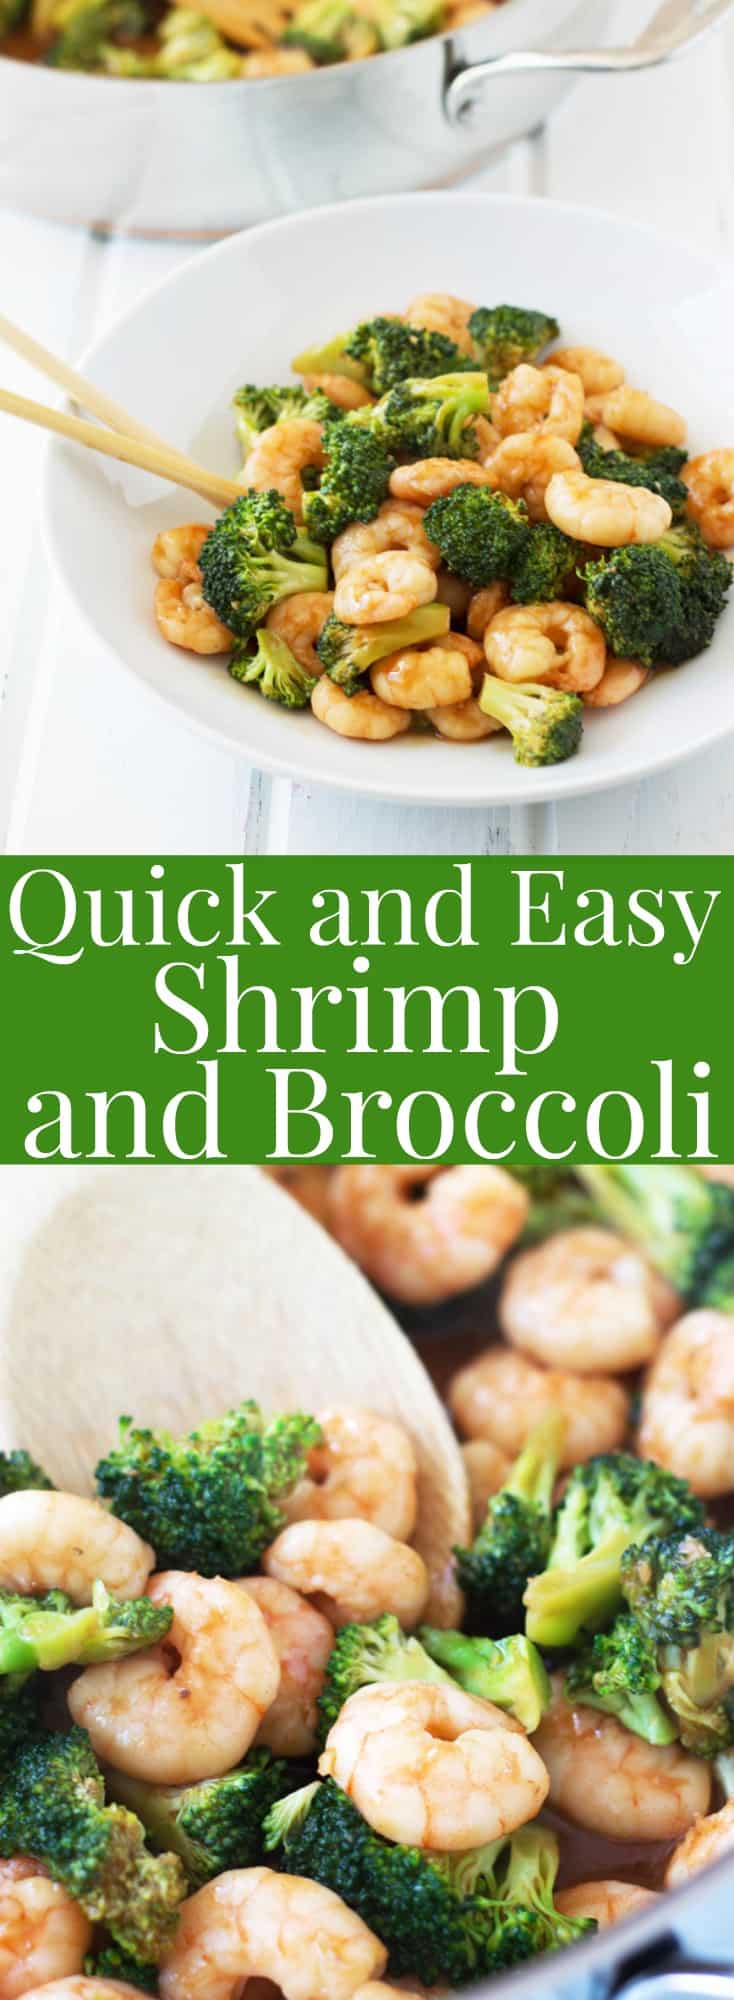 This Quick and Easy Shrimp and Broccoli will be on you table in about 15 minutes! Now that's fast! | www.countrysidecravings.com